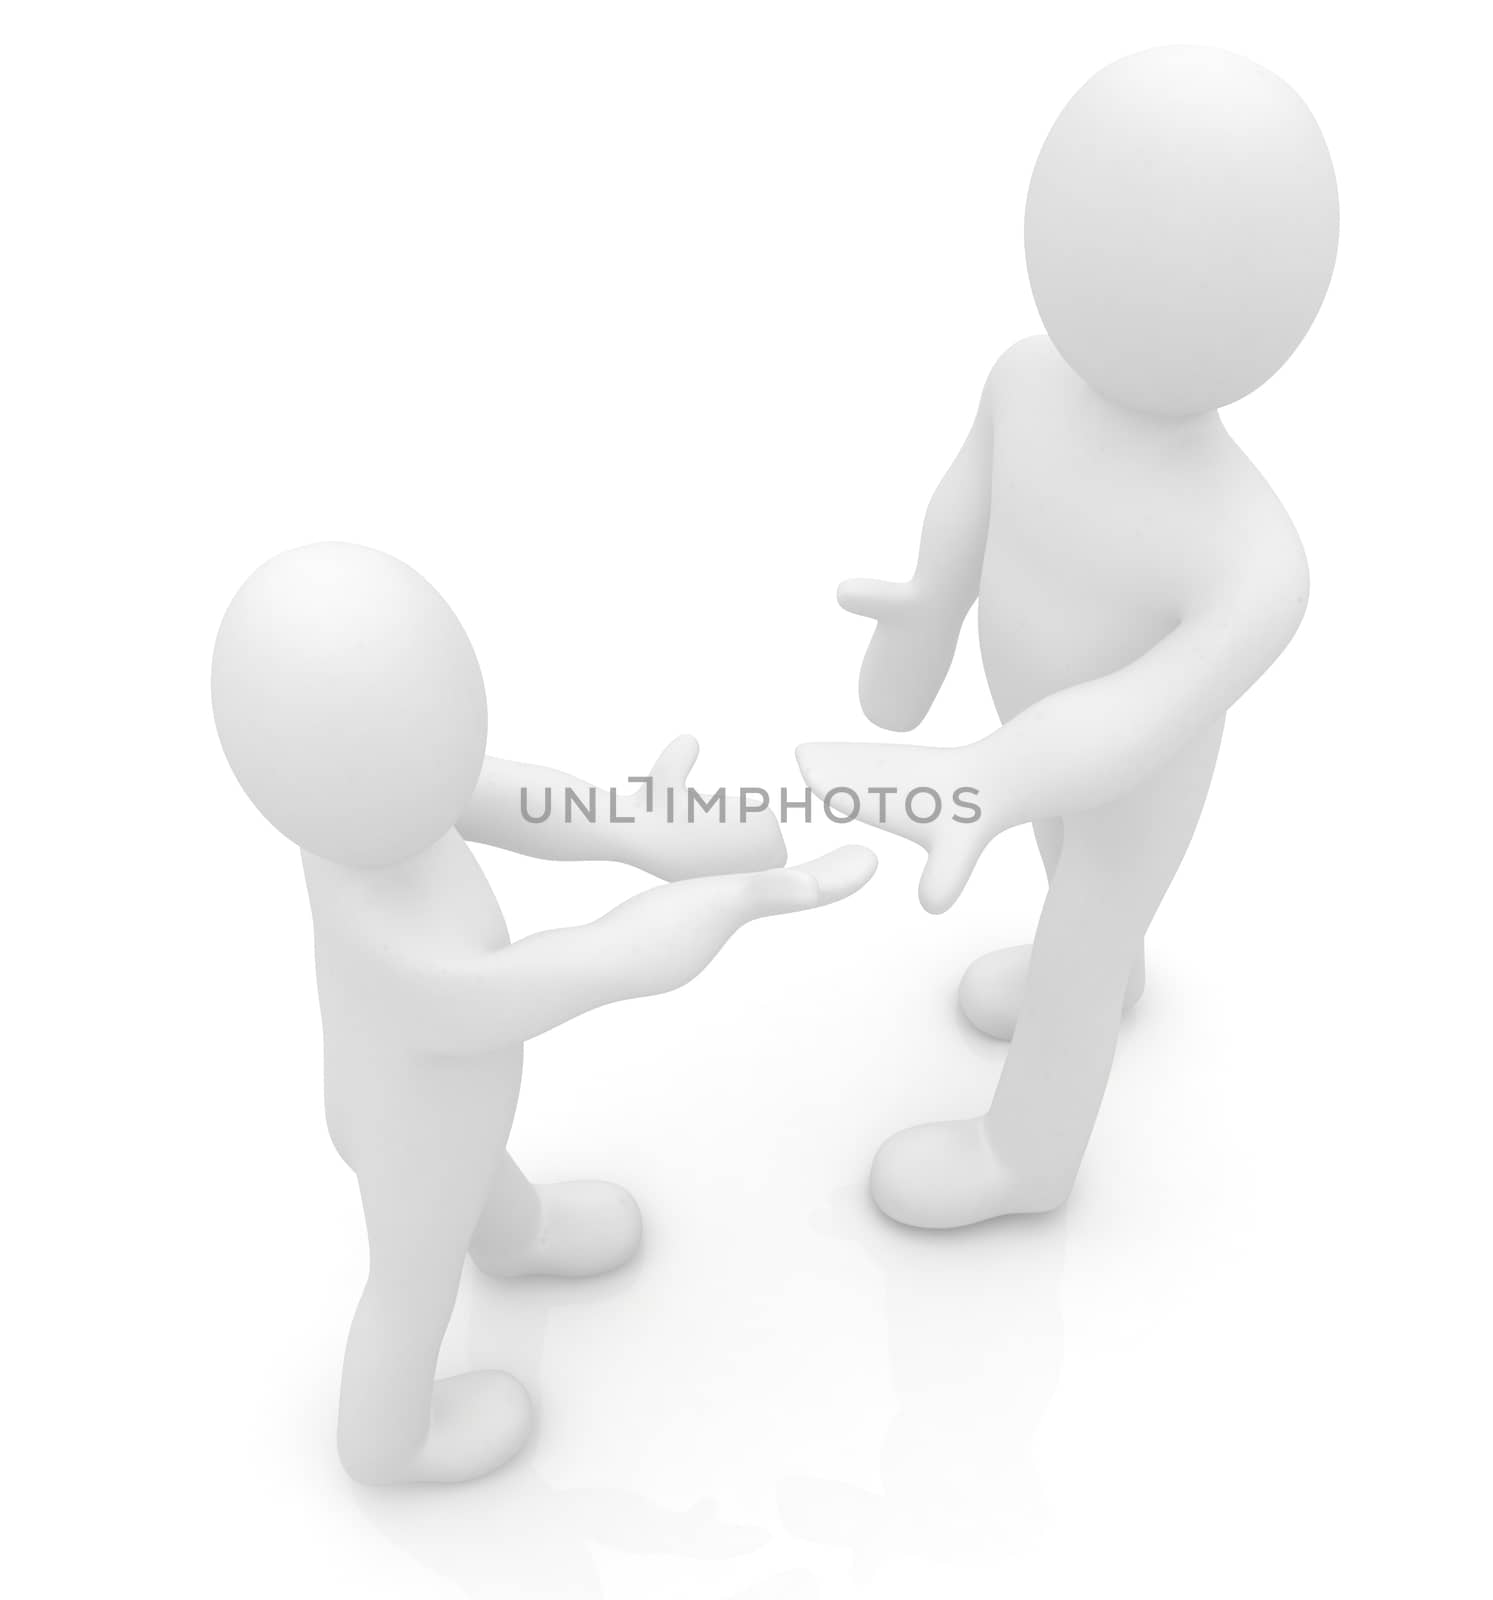 3d man gives. Insert your topic on a white background